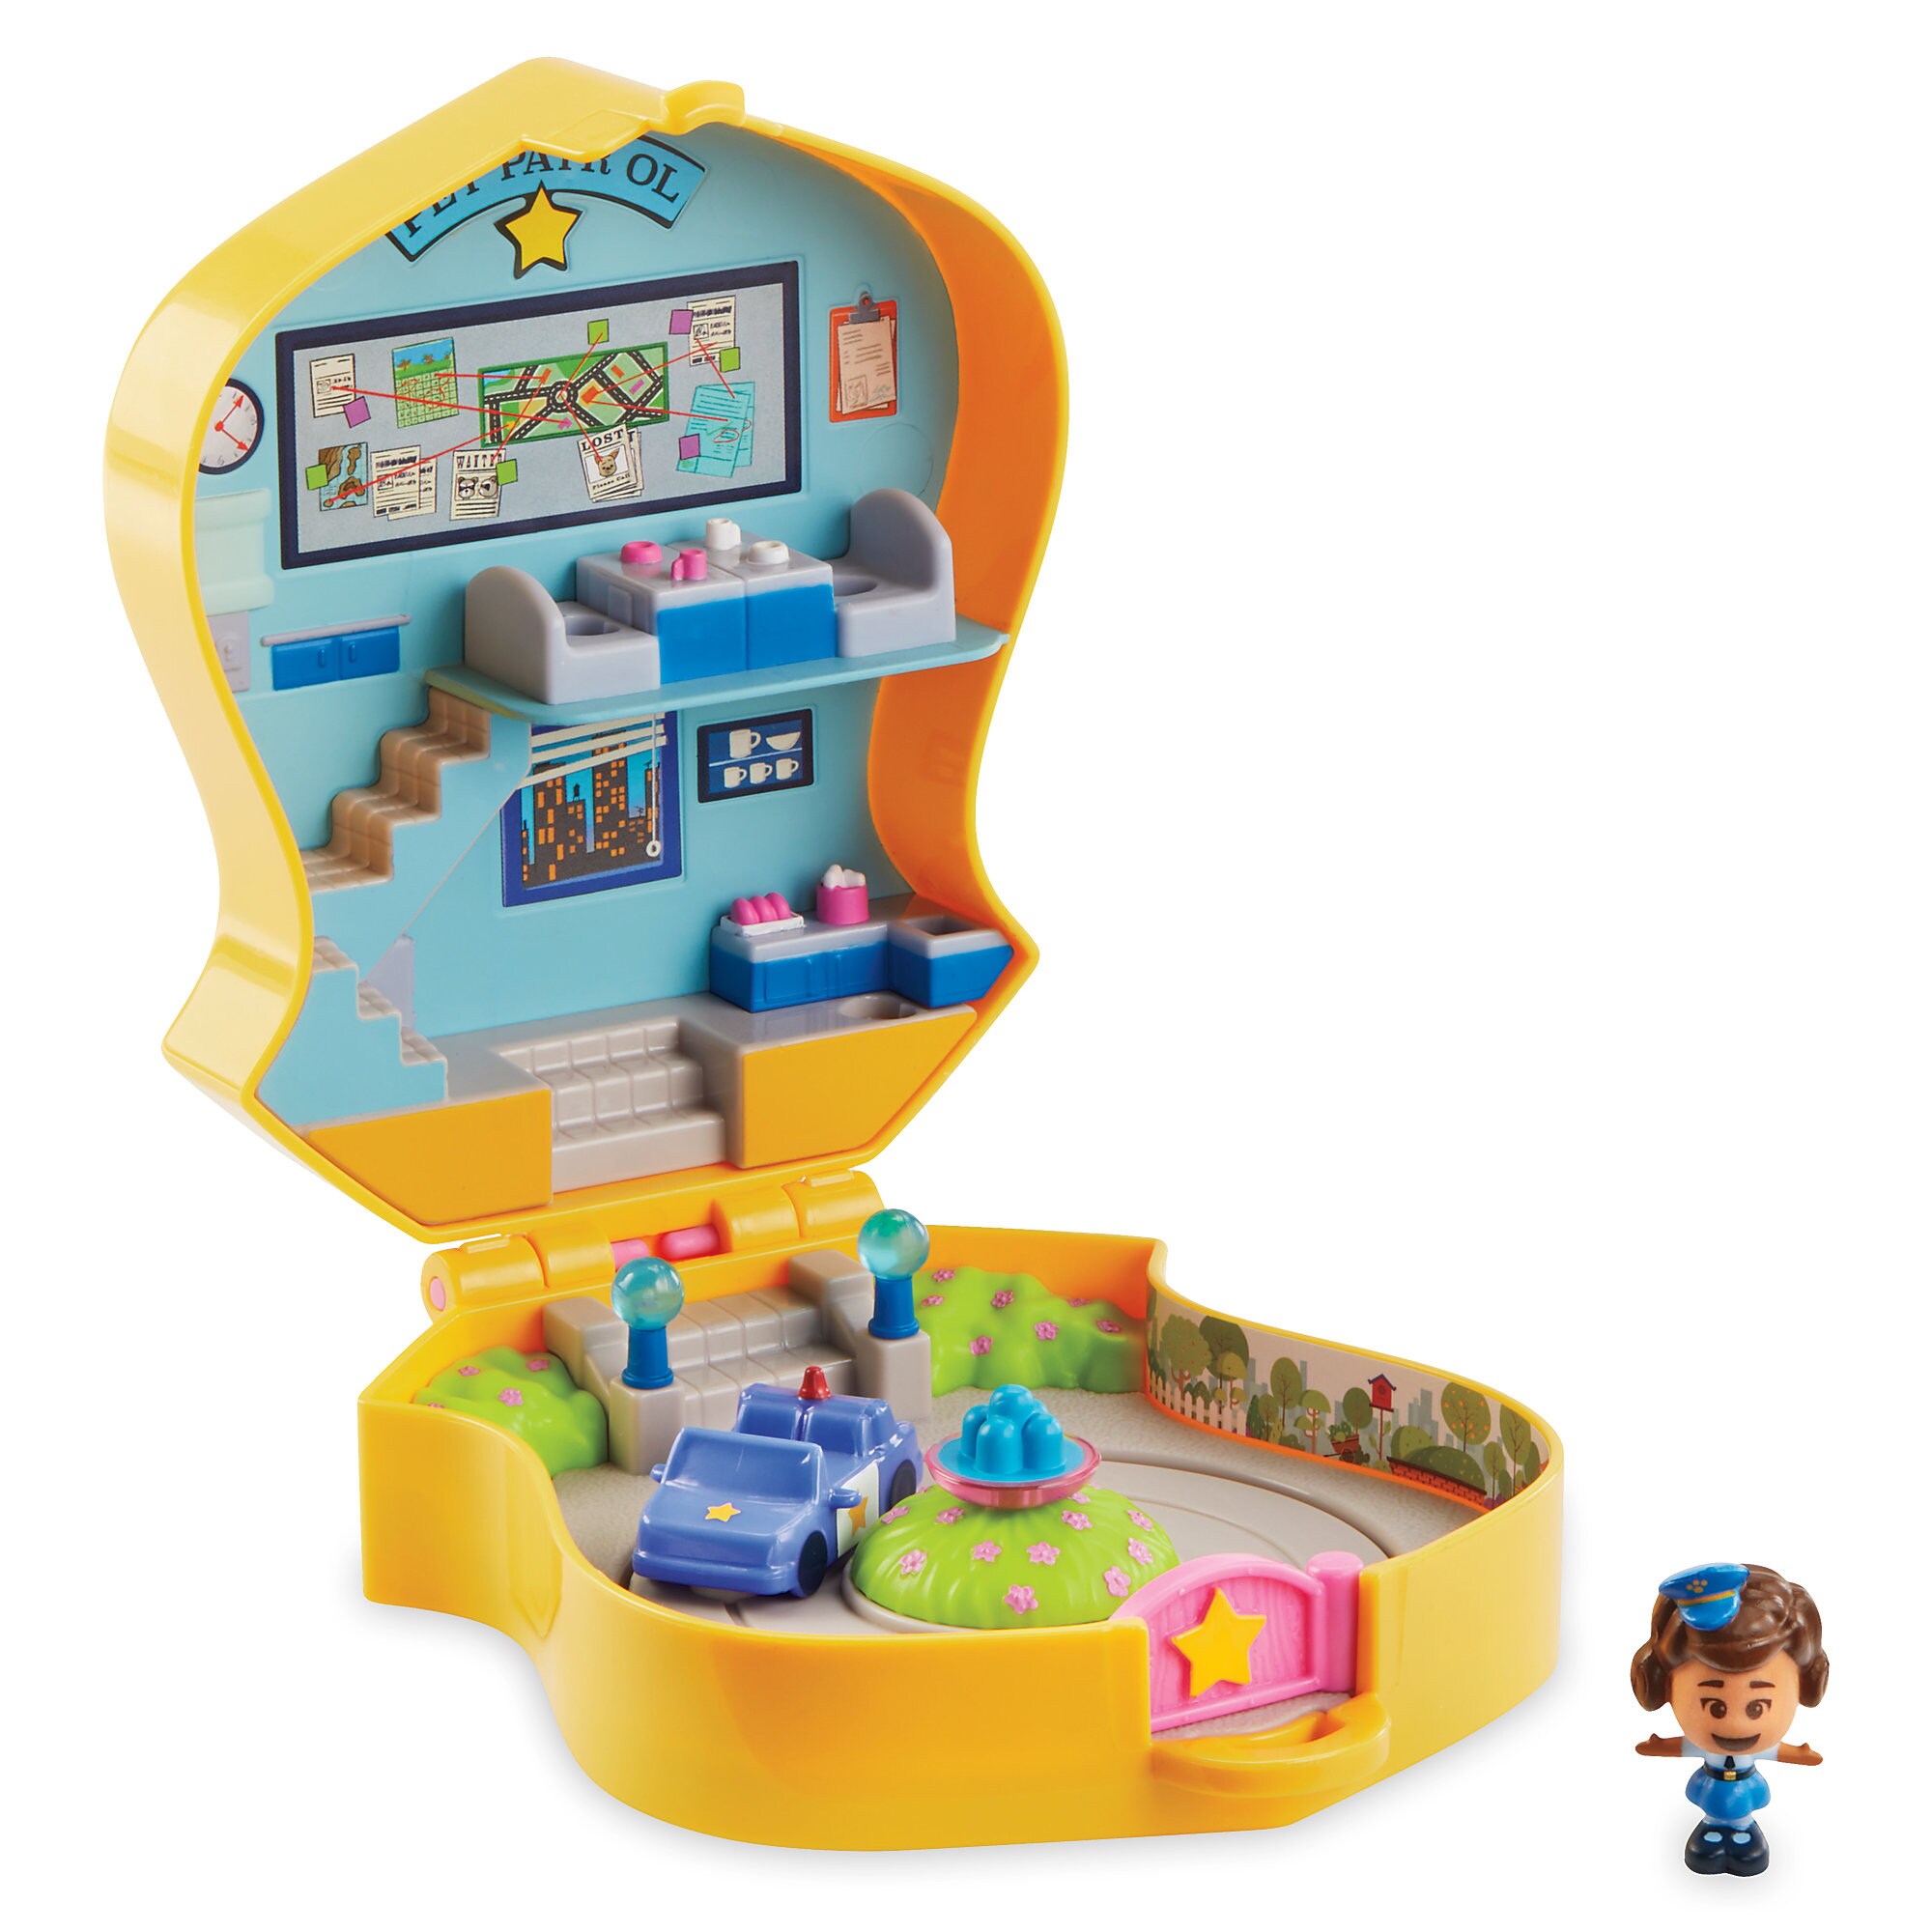 Giggle McDimples Pet Patrol Play Set - Toy Story 4